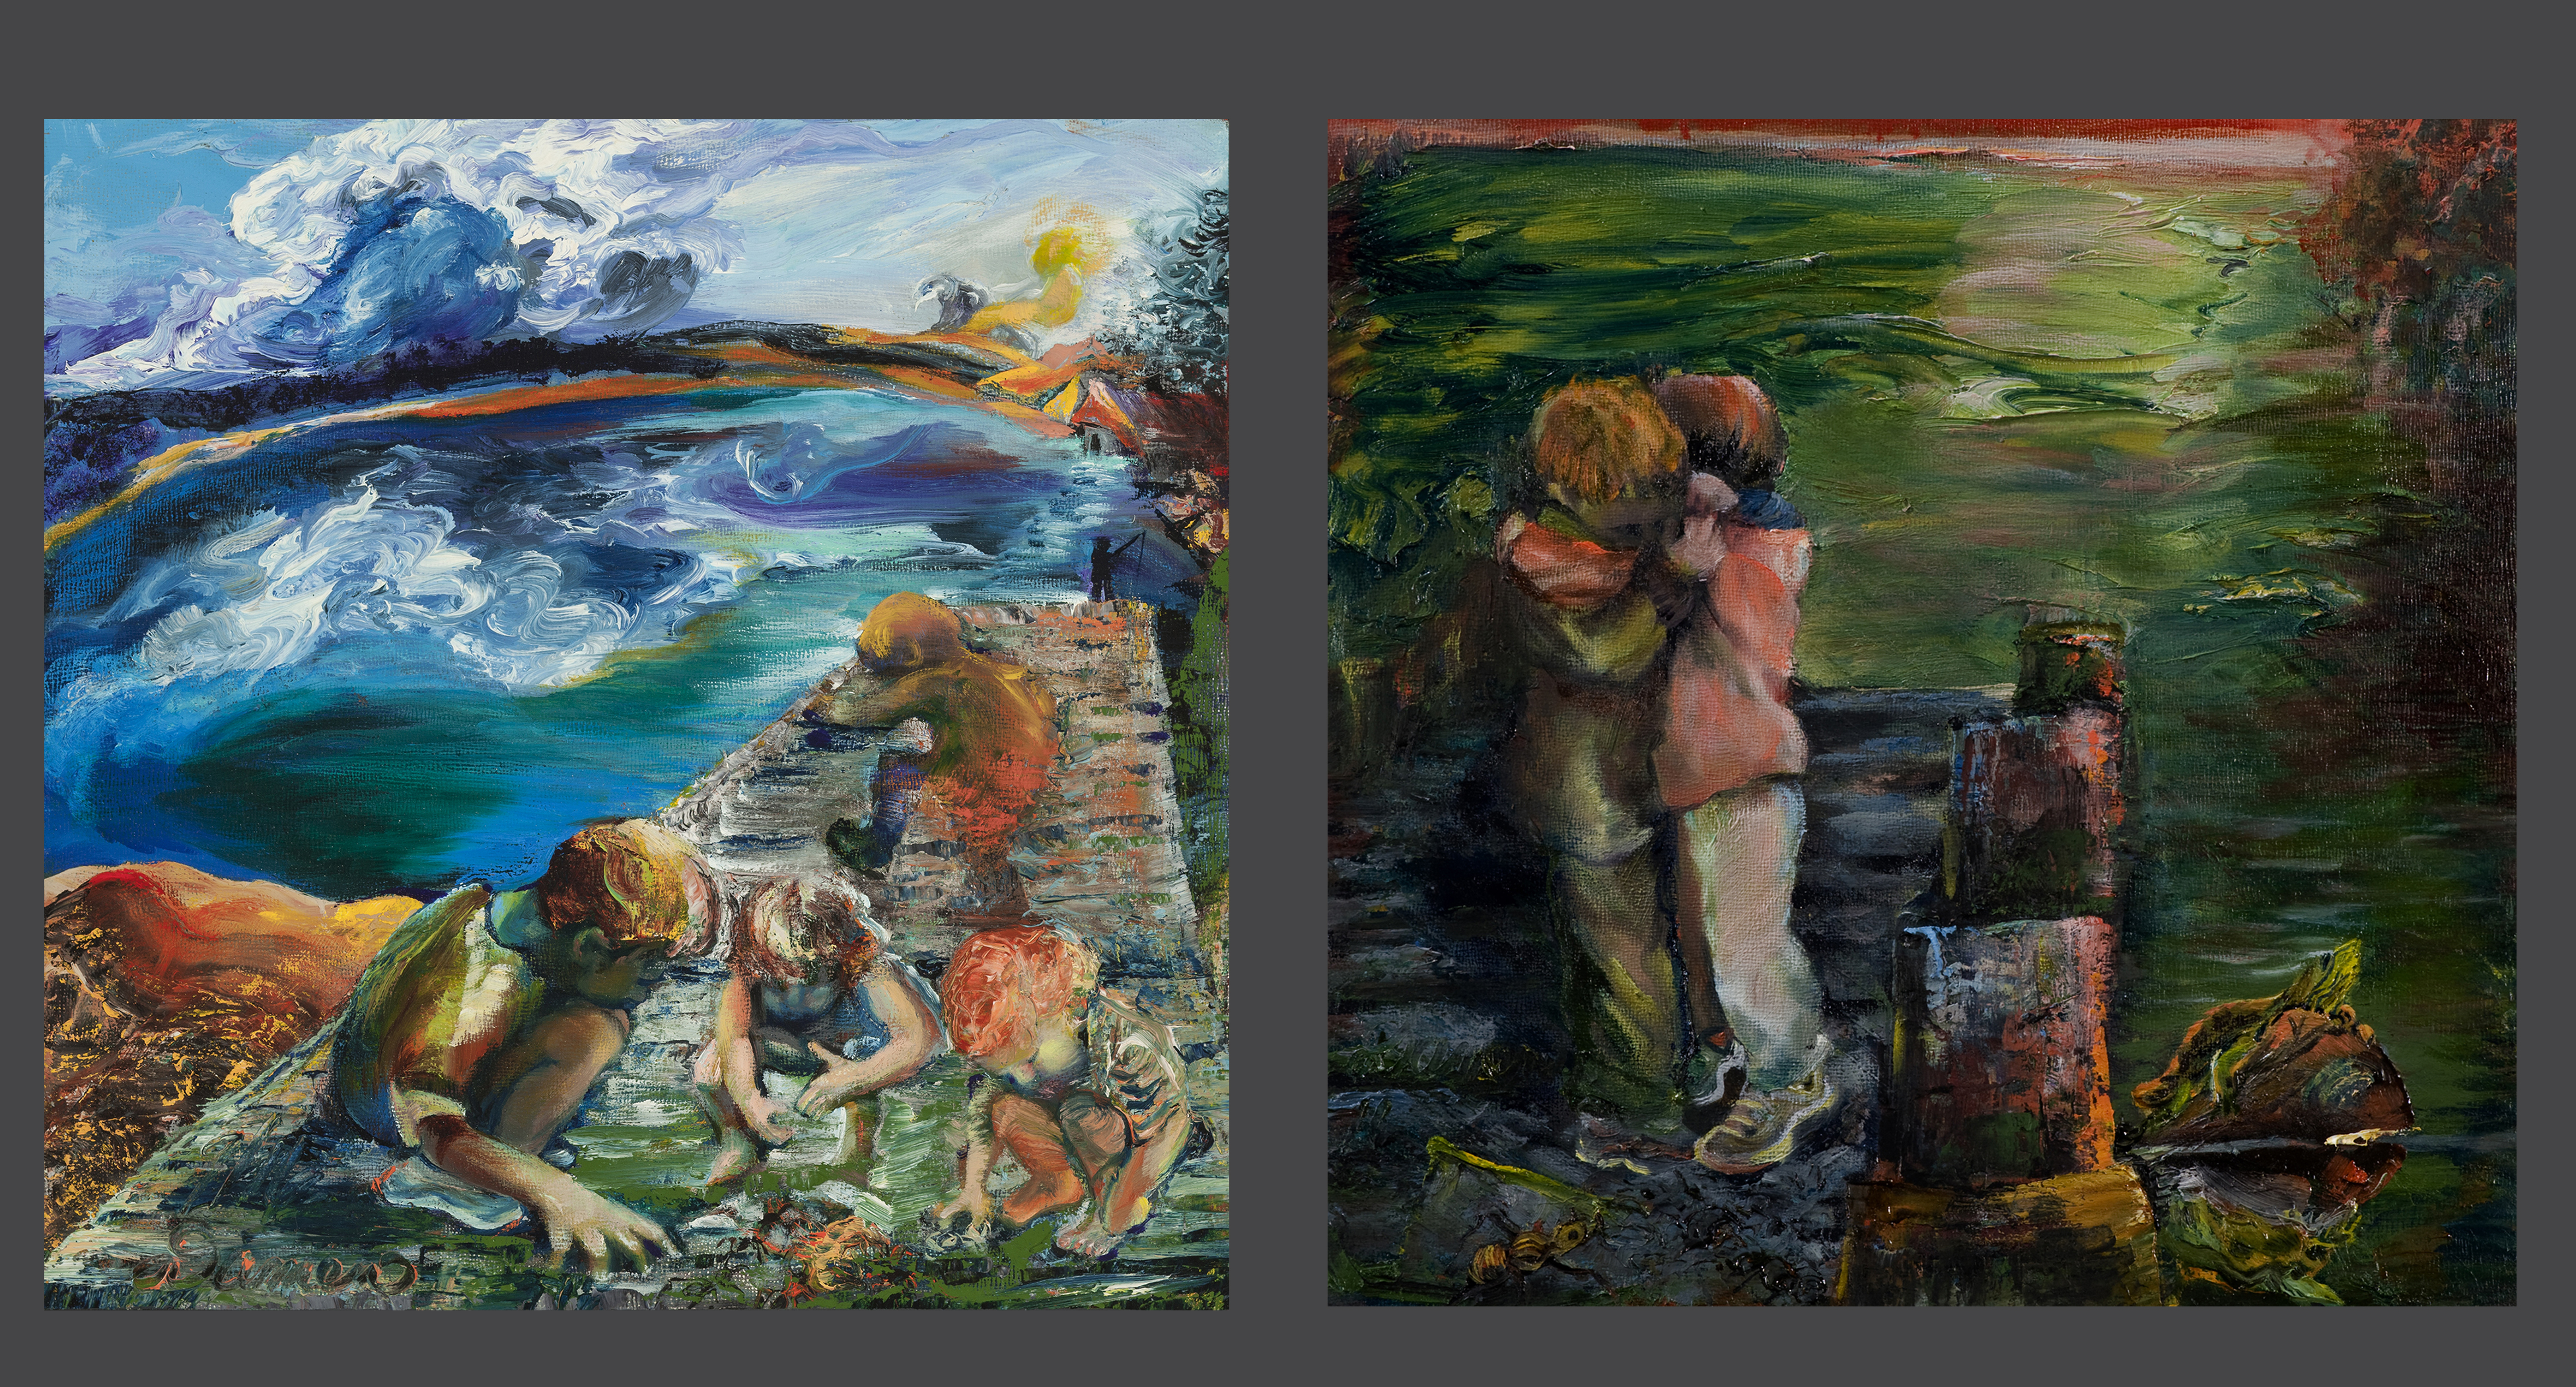 companion oil paintings for poem, in one children are searching under white culmulus clouds hiding whimsical character, the other two children hug, comforted and surrounded by a deep green lake